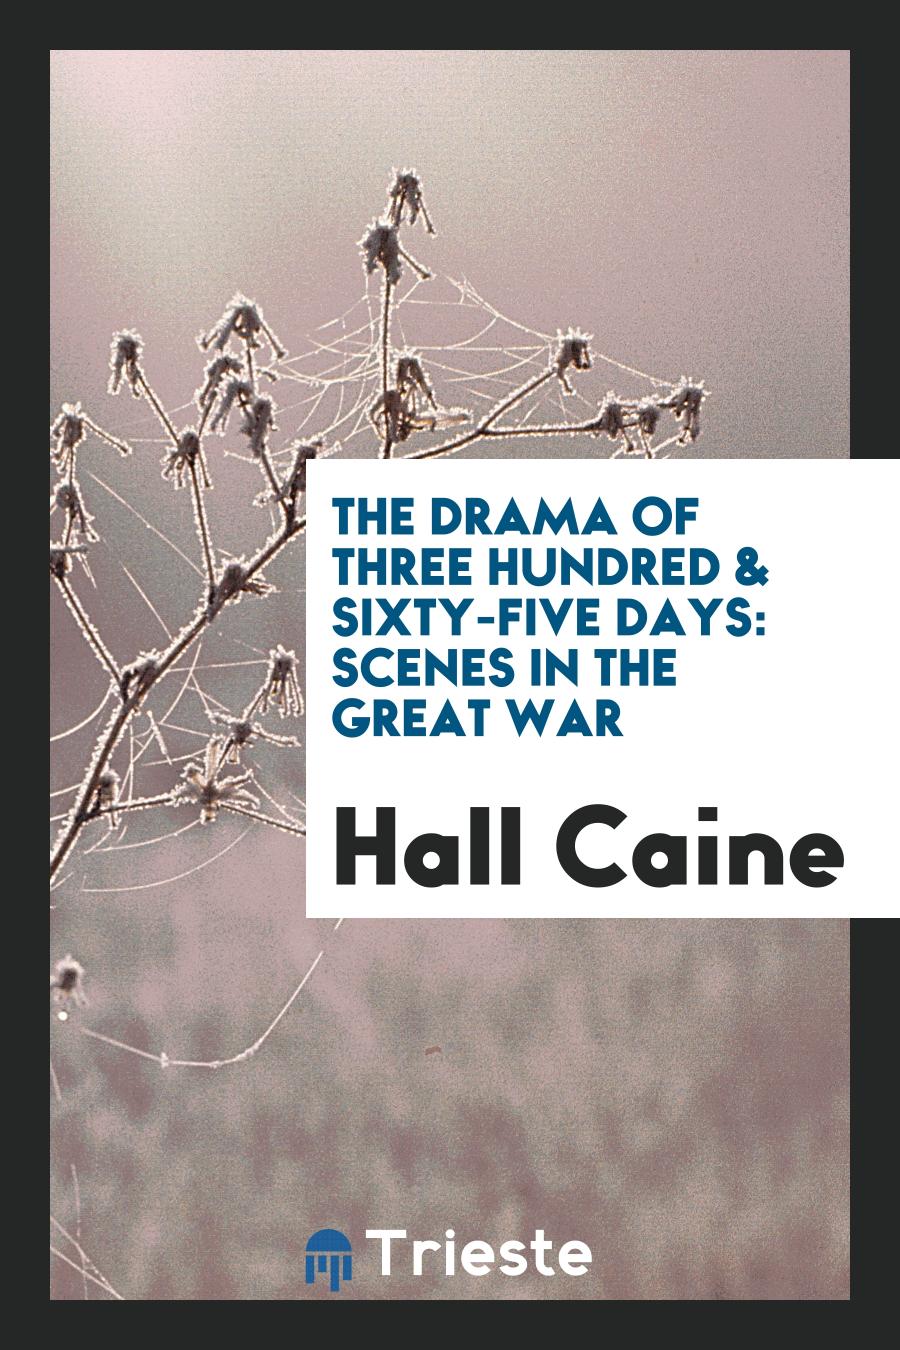 Hall Caine - The Drama of Three Hundred & Sixty-Five Days: Scenes in the Great War